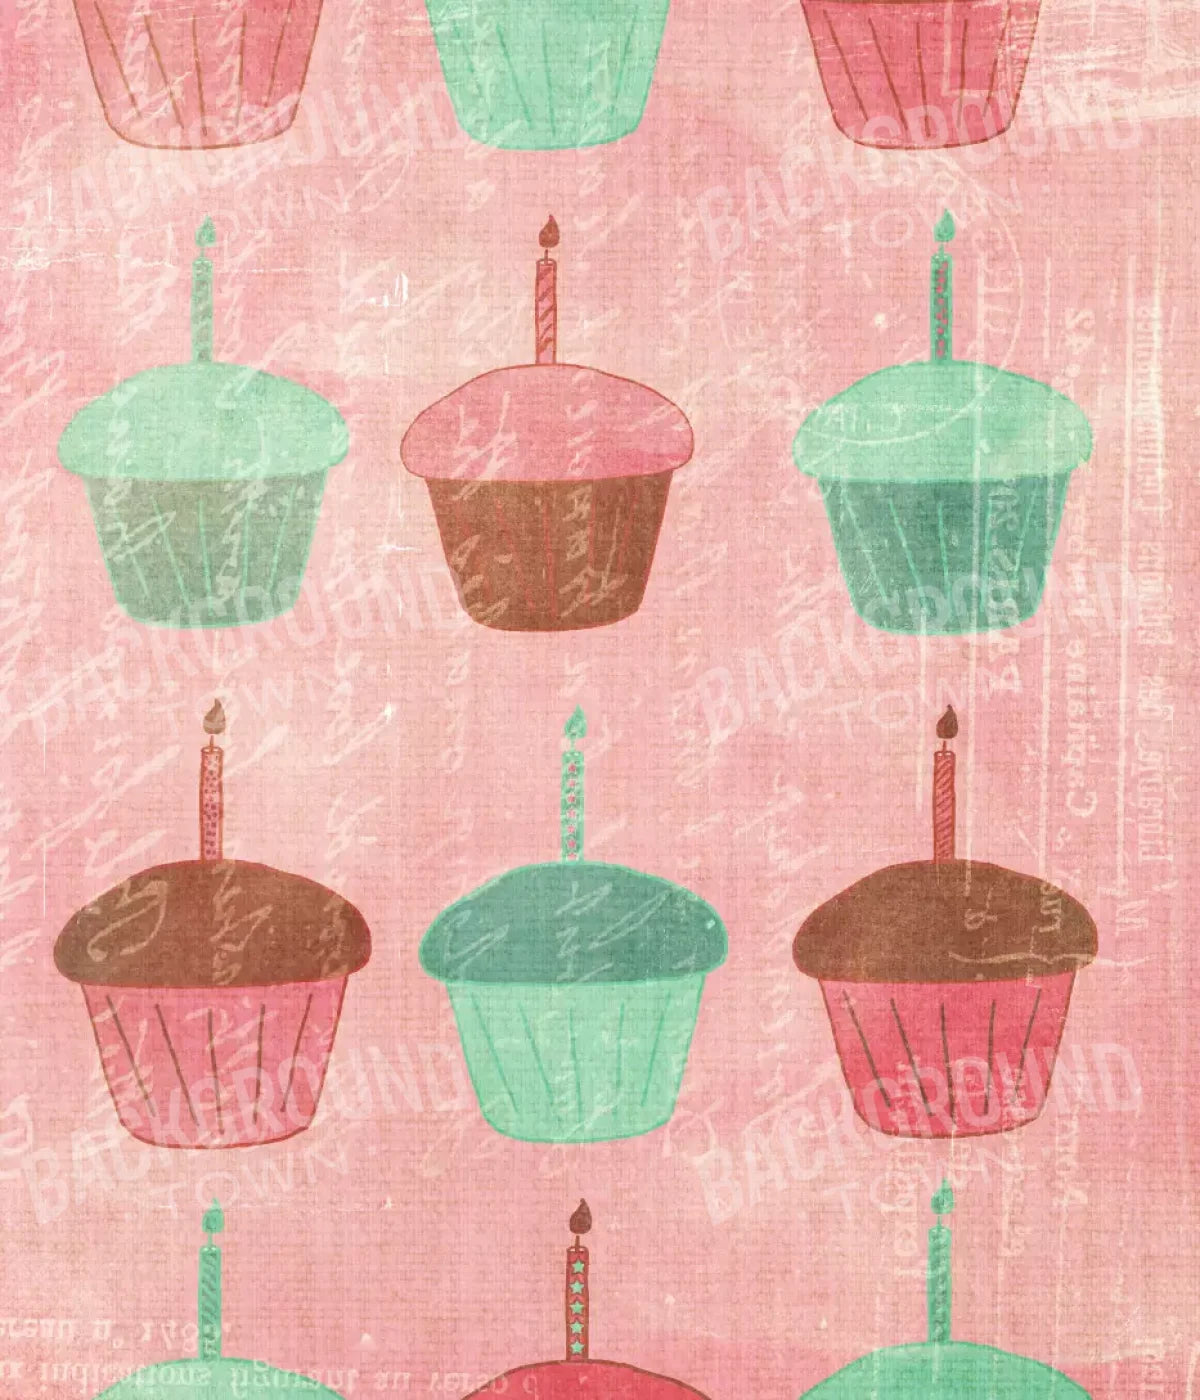 Girlie Cupcakes 10X12 Ultracloth ( 120 X 144 Inch ) Backdrop